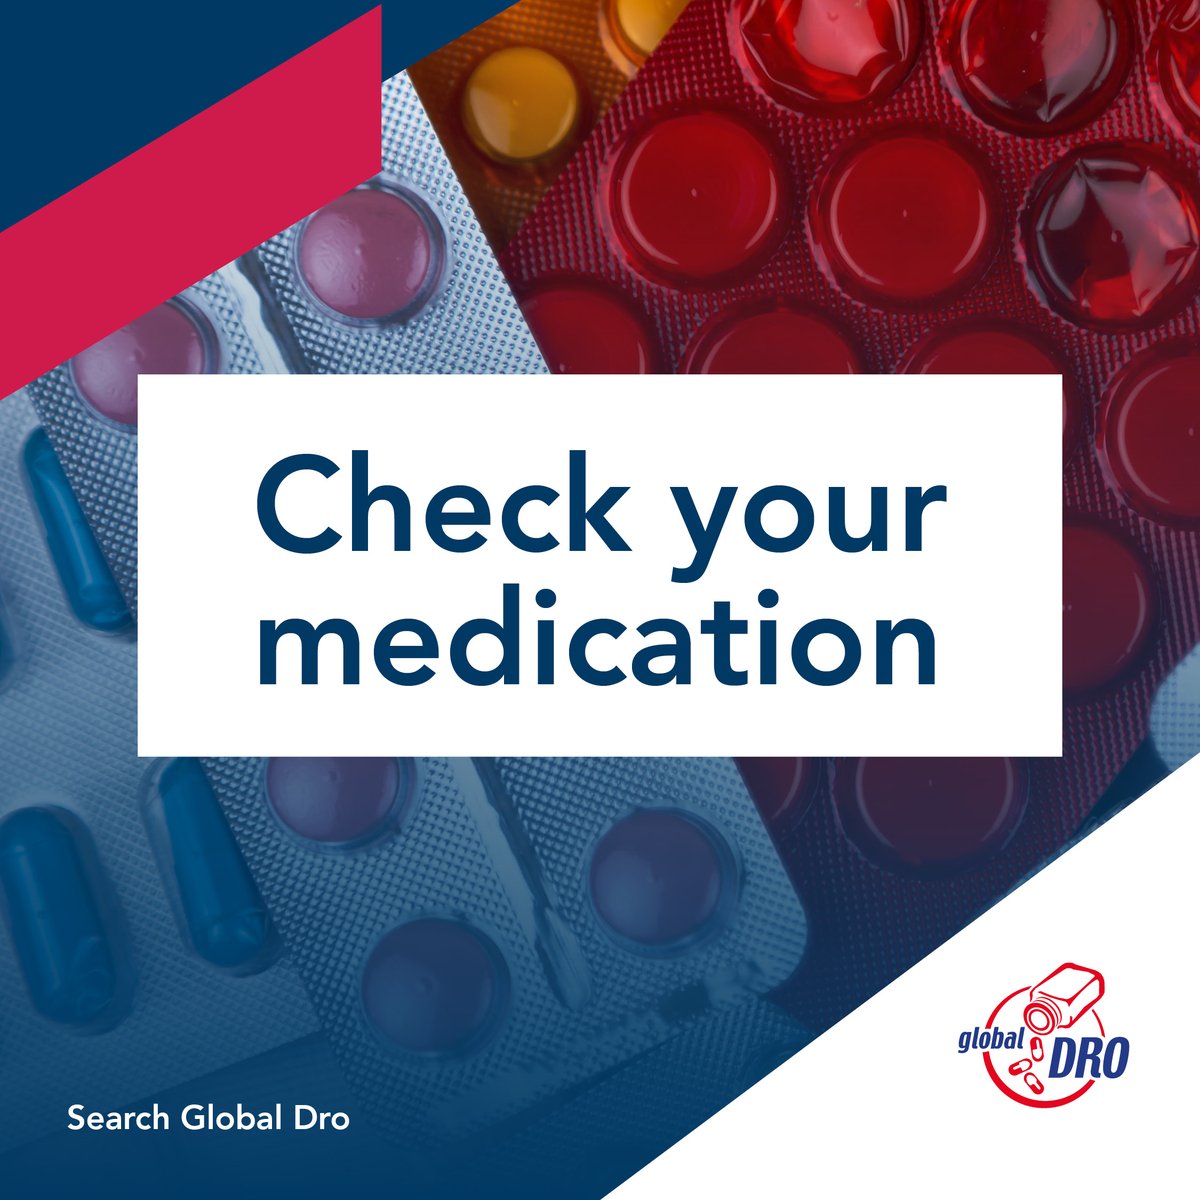 🤧The hay fever season is getting underway... Before you take any medication for it, or for anything else, if you're competing it is your responsibility to check all medications. Get advice on the @ukantidoping website➡️tinyurl.com/35xbz9xd